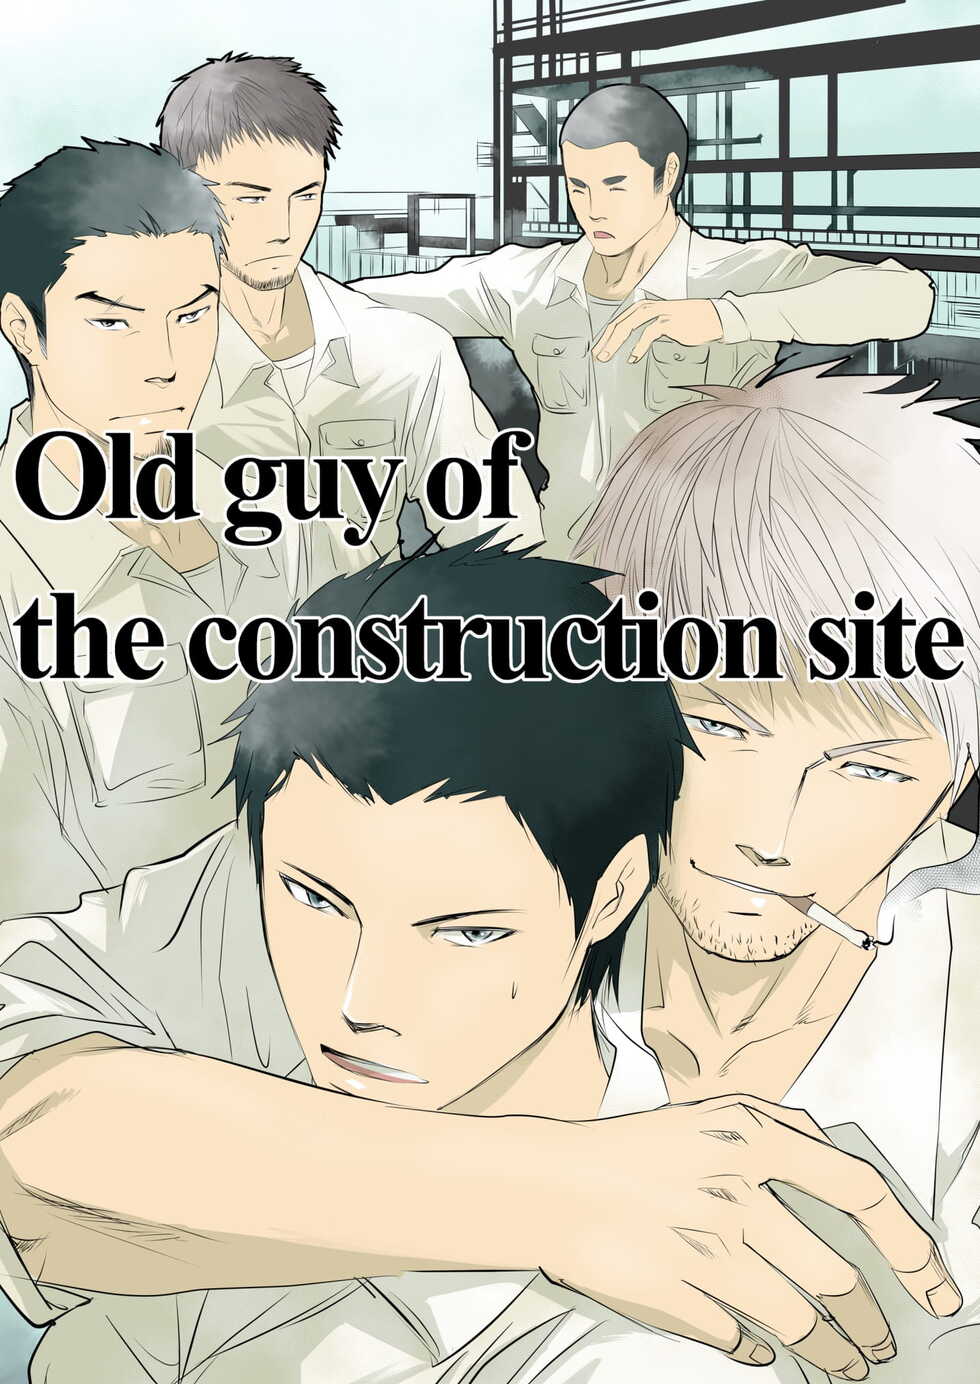 [Saragi (R5)] Genba no Ossan | Old guy of the construction site [English] [Digital] - Page 1